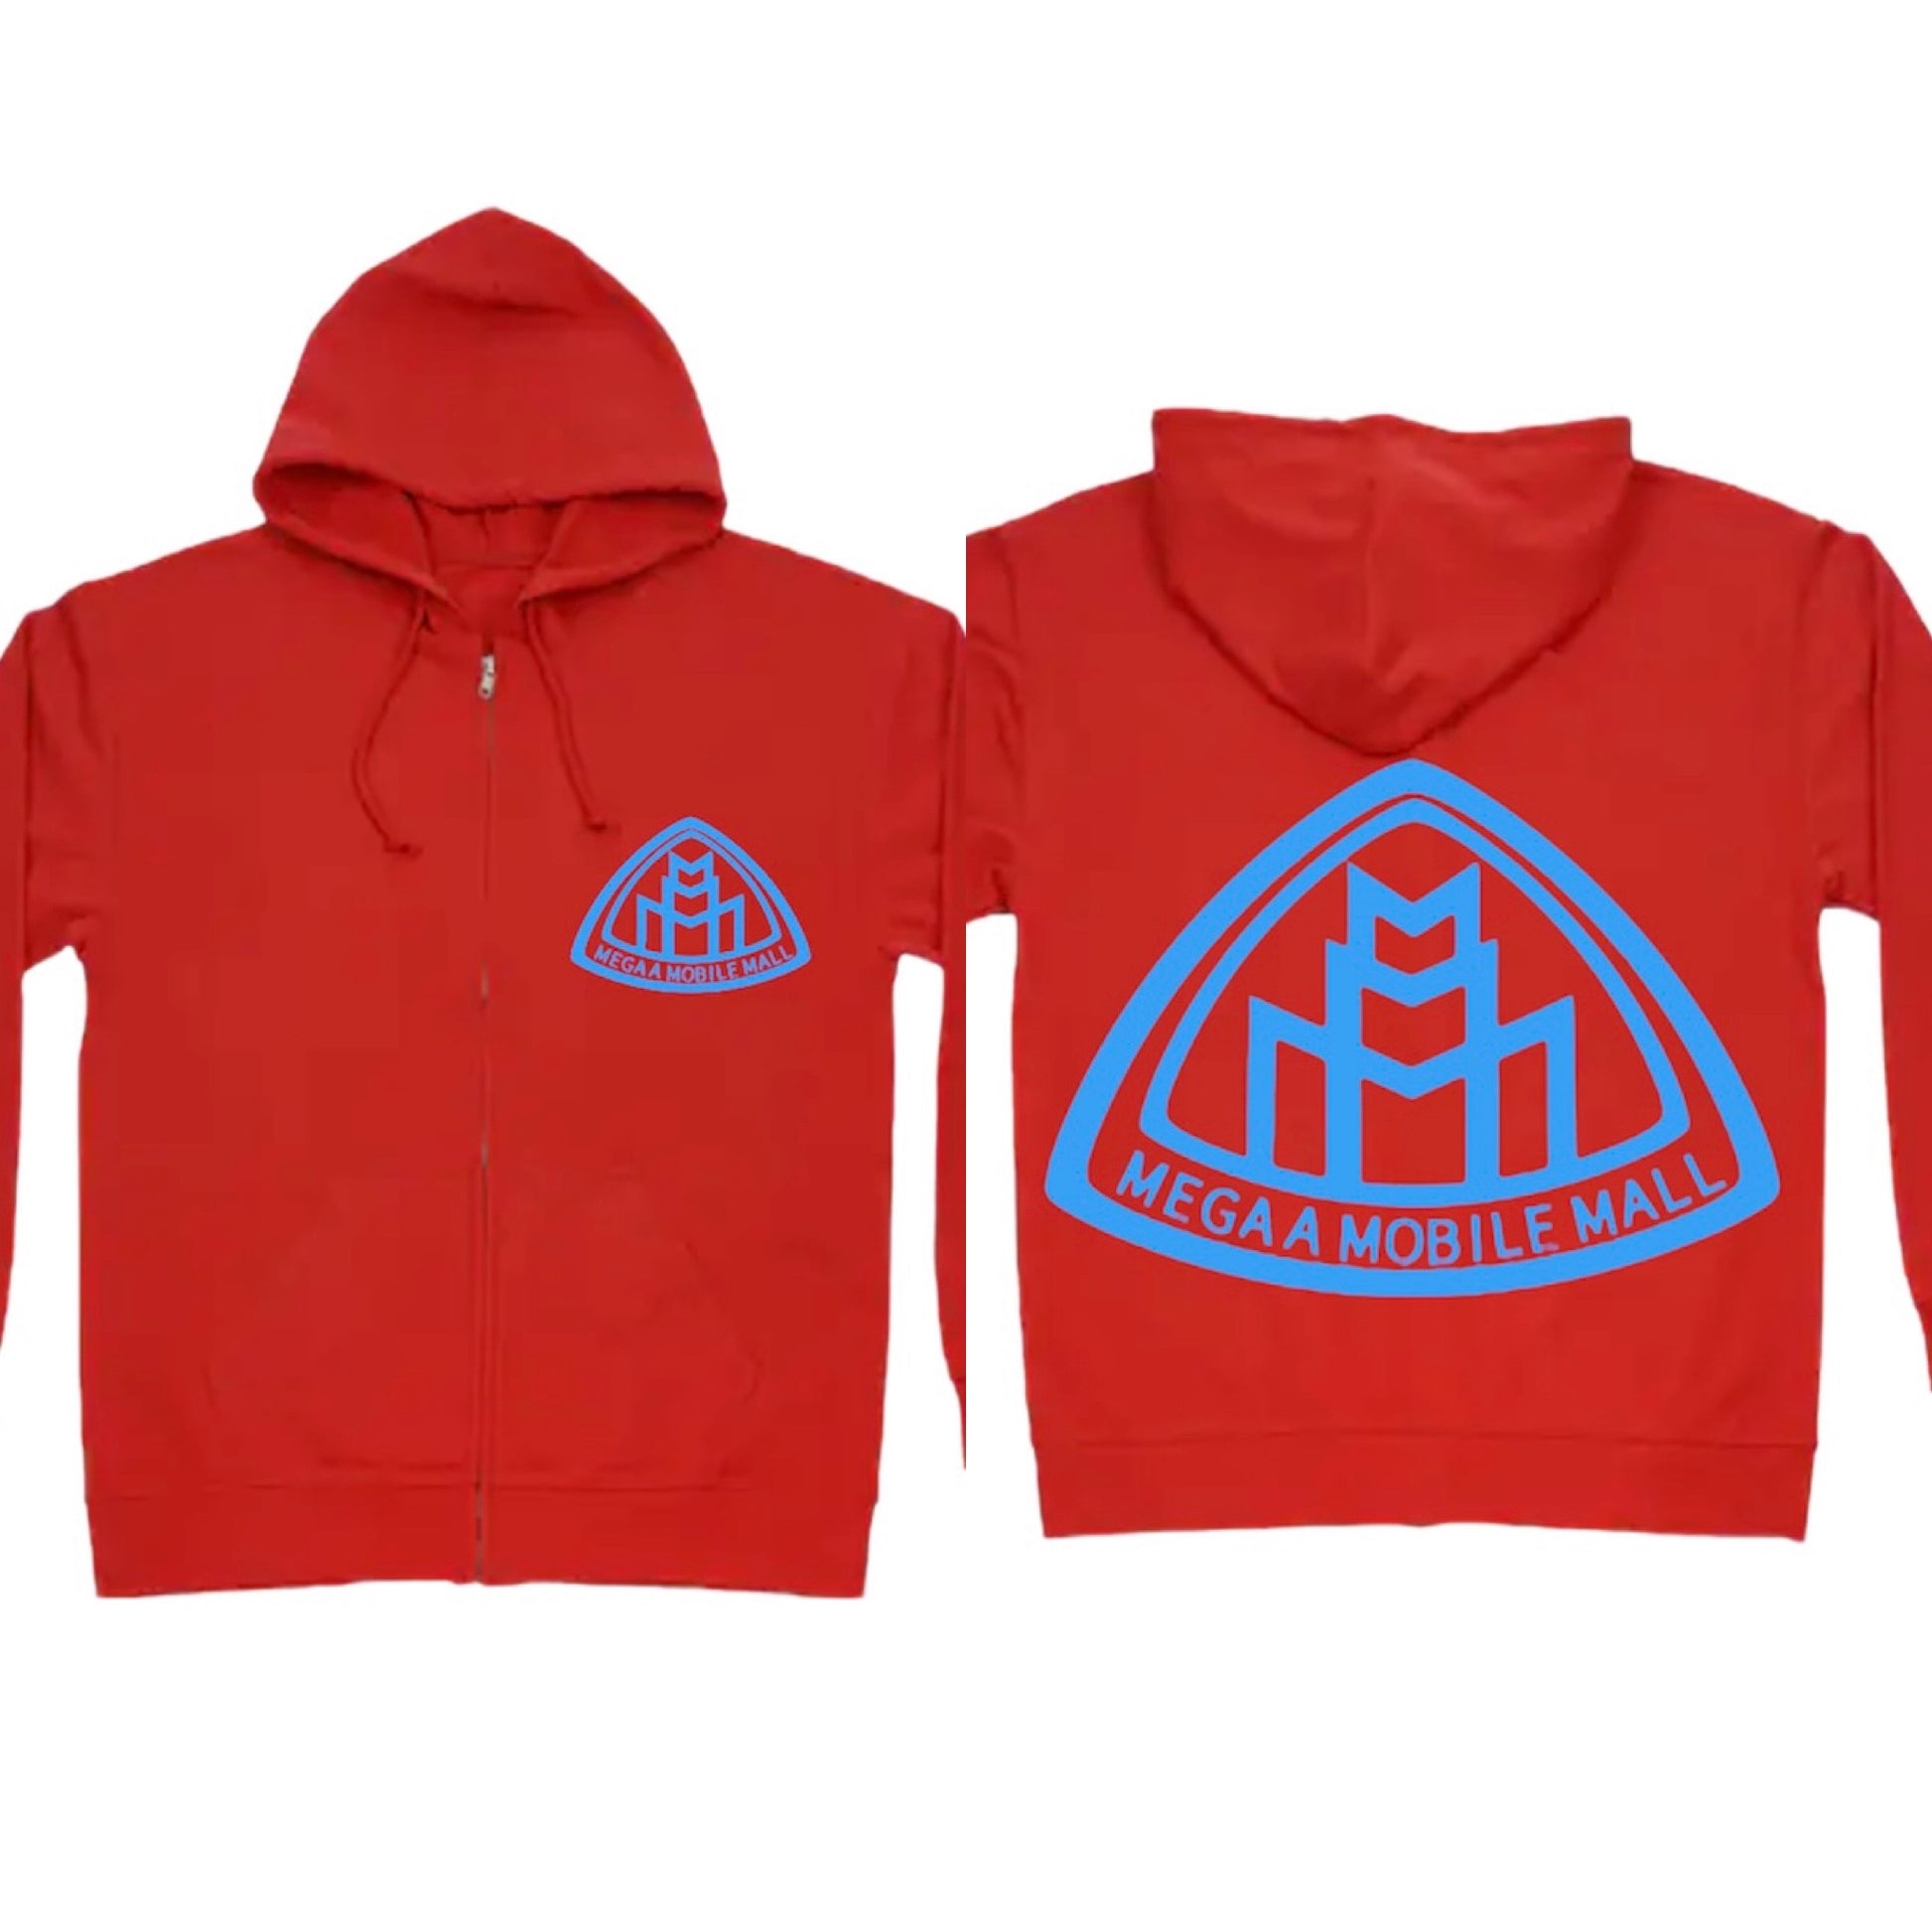 megaamobilemall red zip up hoodie with sky blue logo